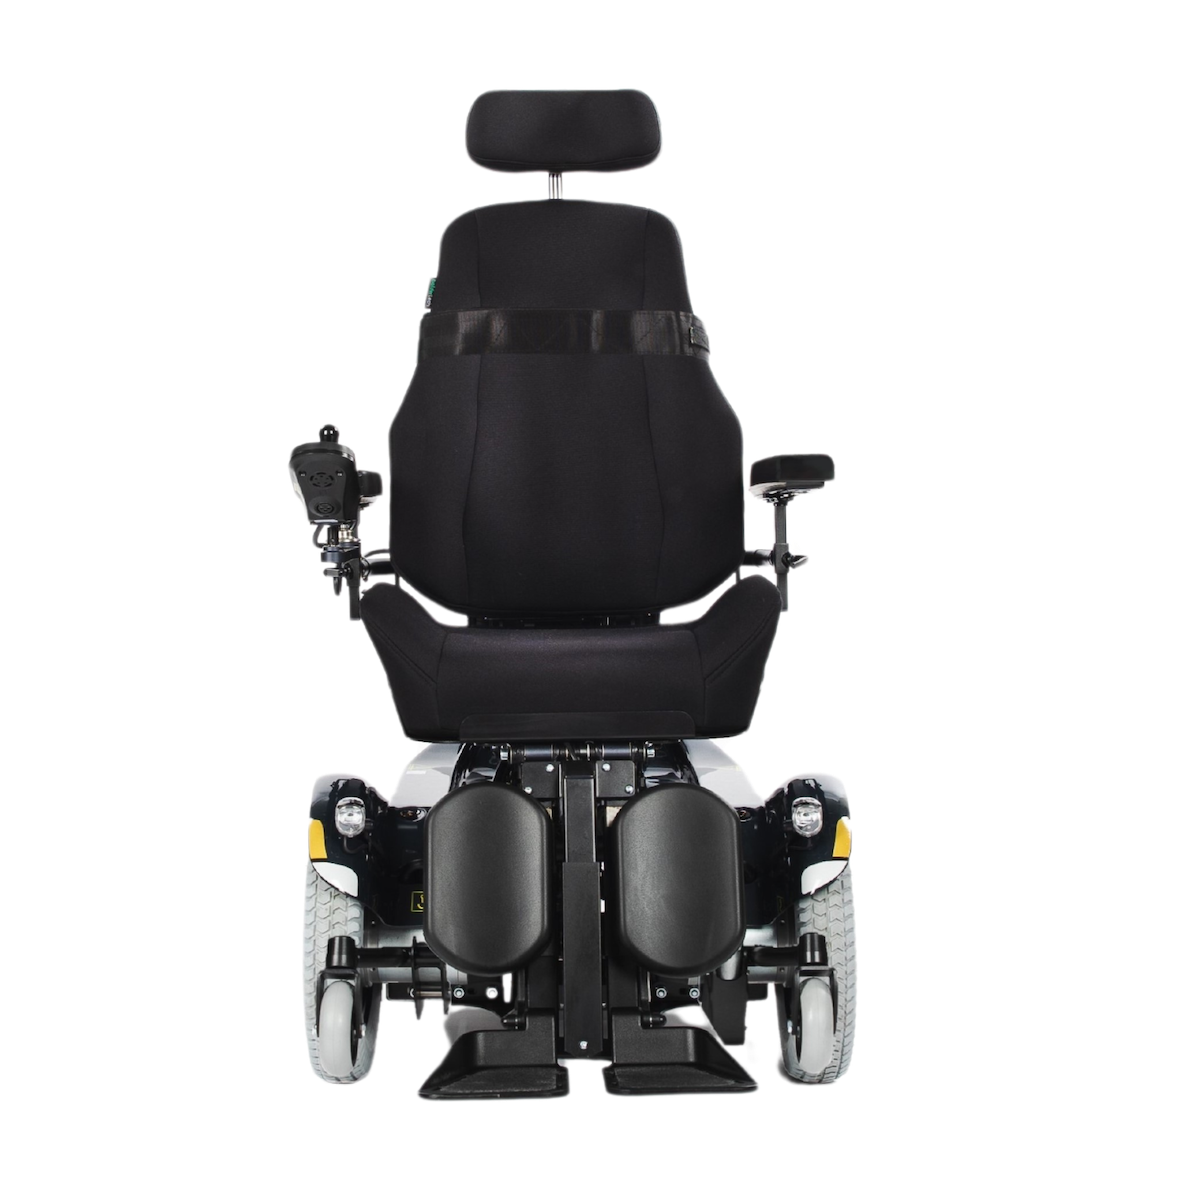 Balder Finesse F390 - A standing powerchair shown in a seated position. 